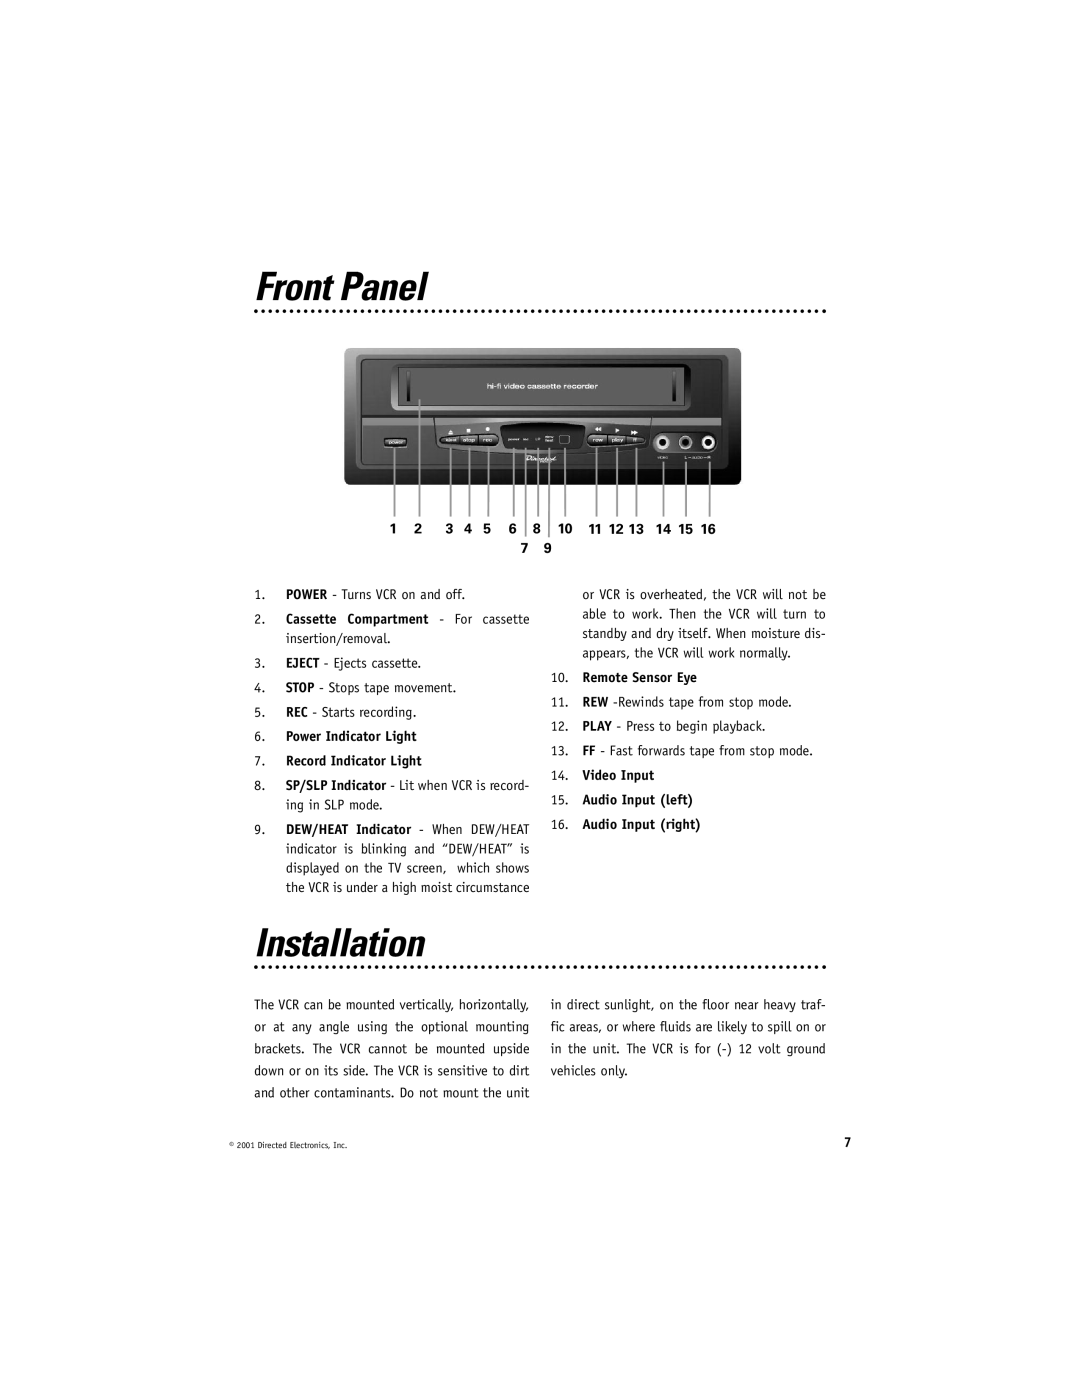 Directed Electronics VC2010 Front Panel, Installation, 11 12, 14 15, Cassette Compartment - For cassette insertion/removal 